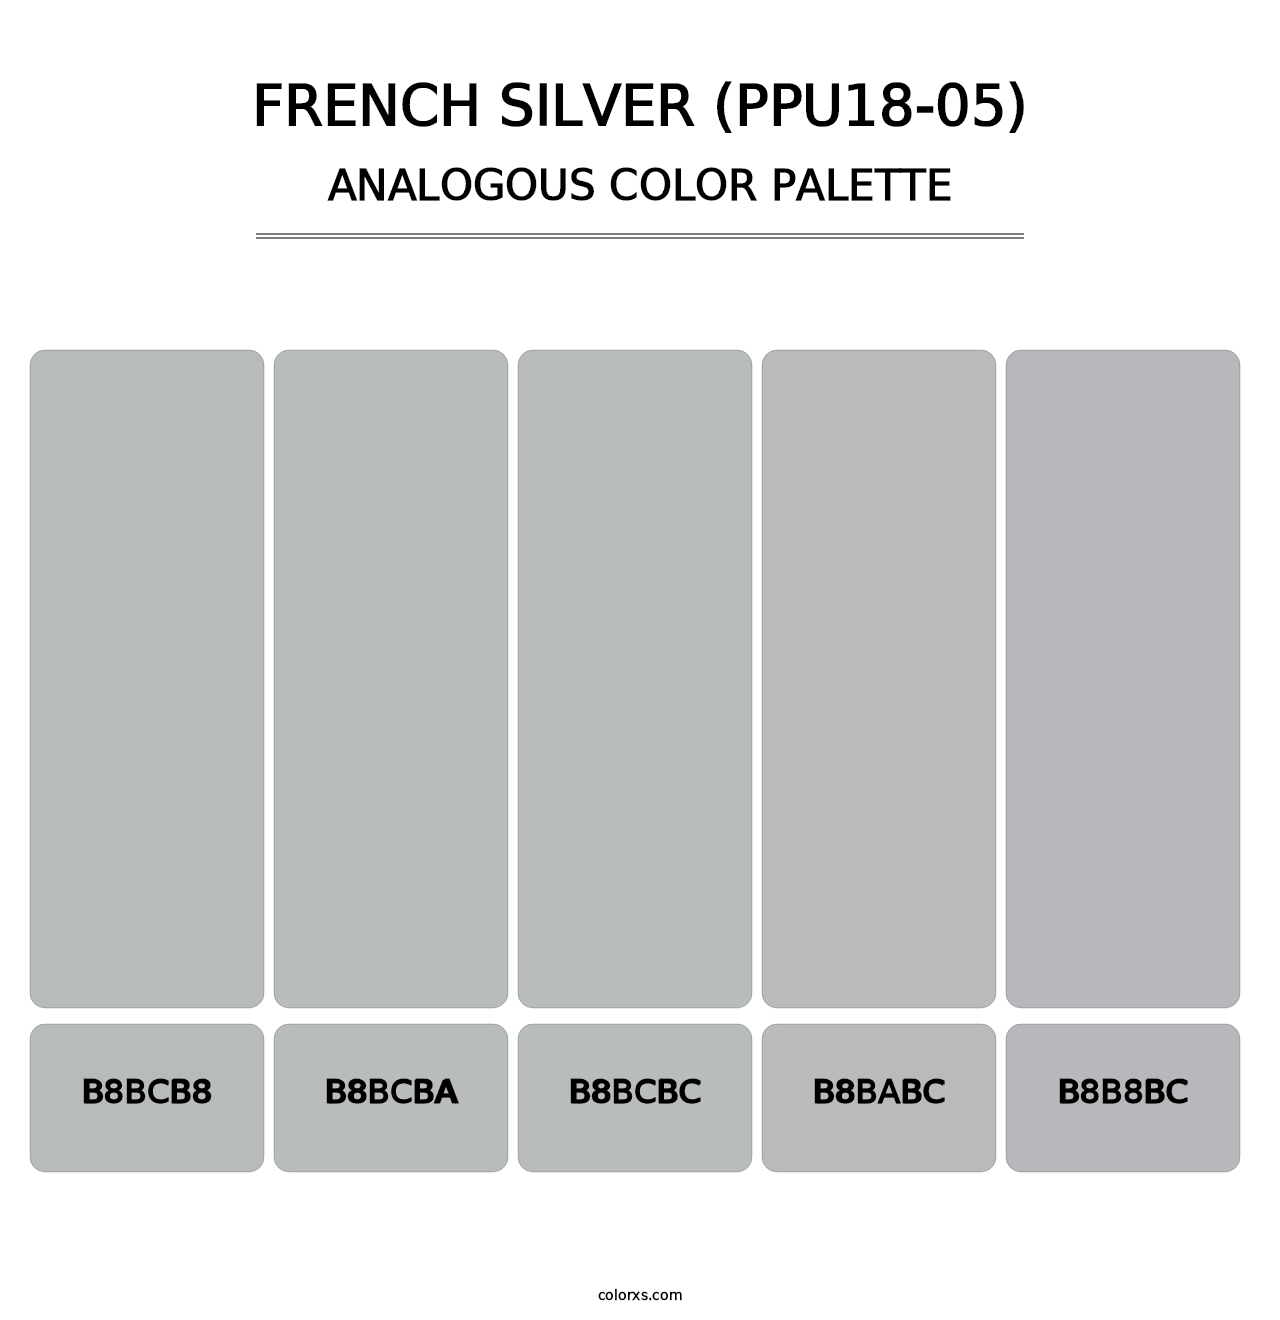 French Silver (PPU18-05) - Analogous Color Palette